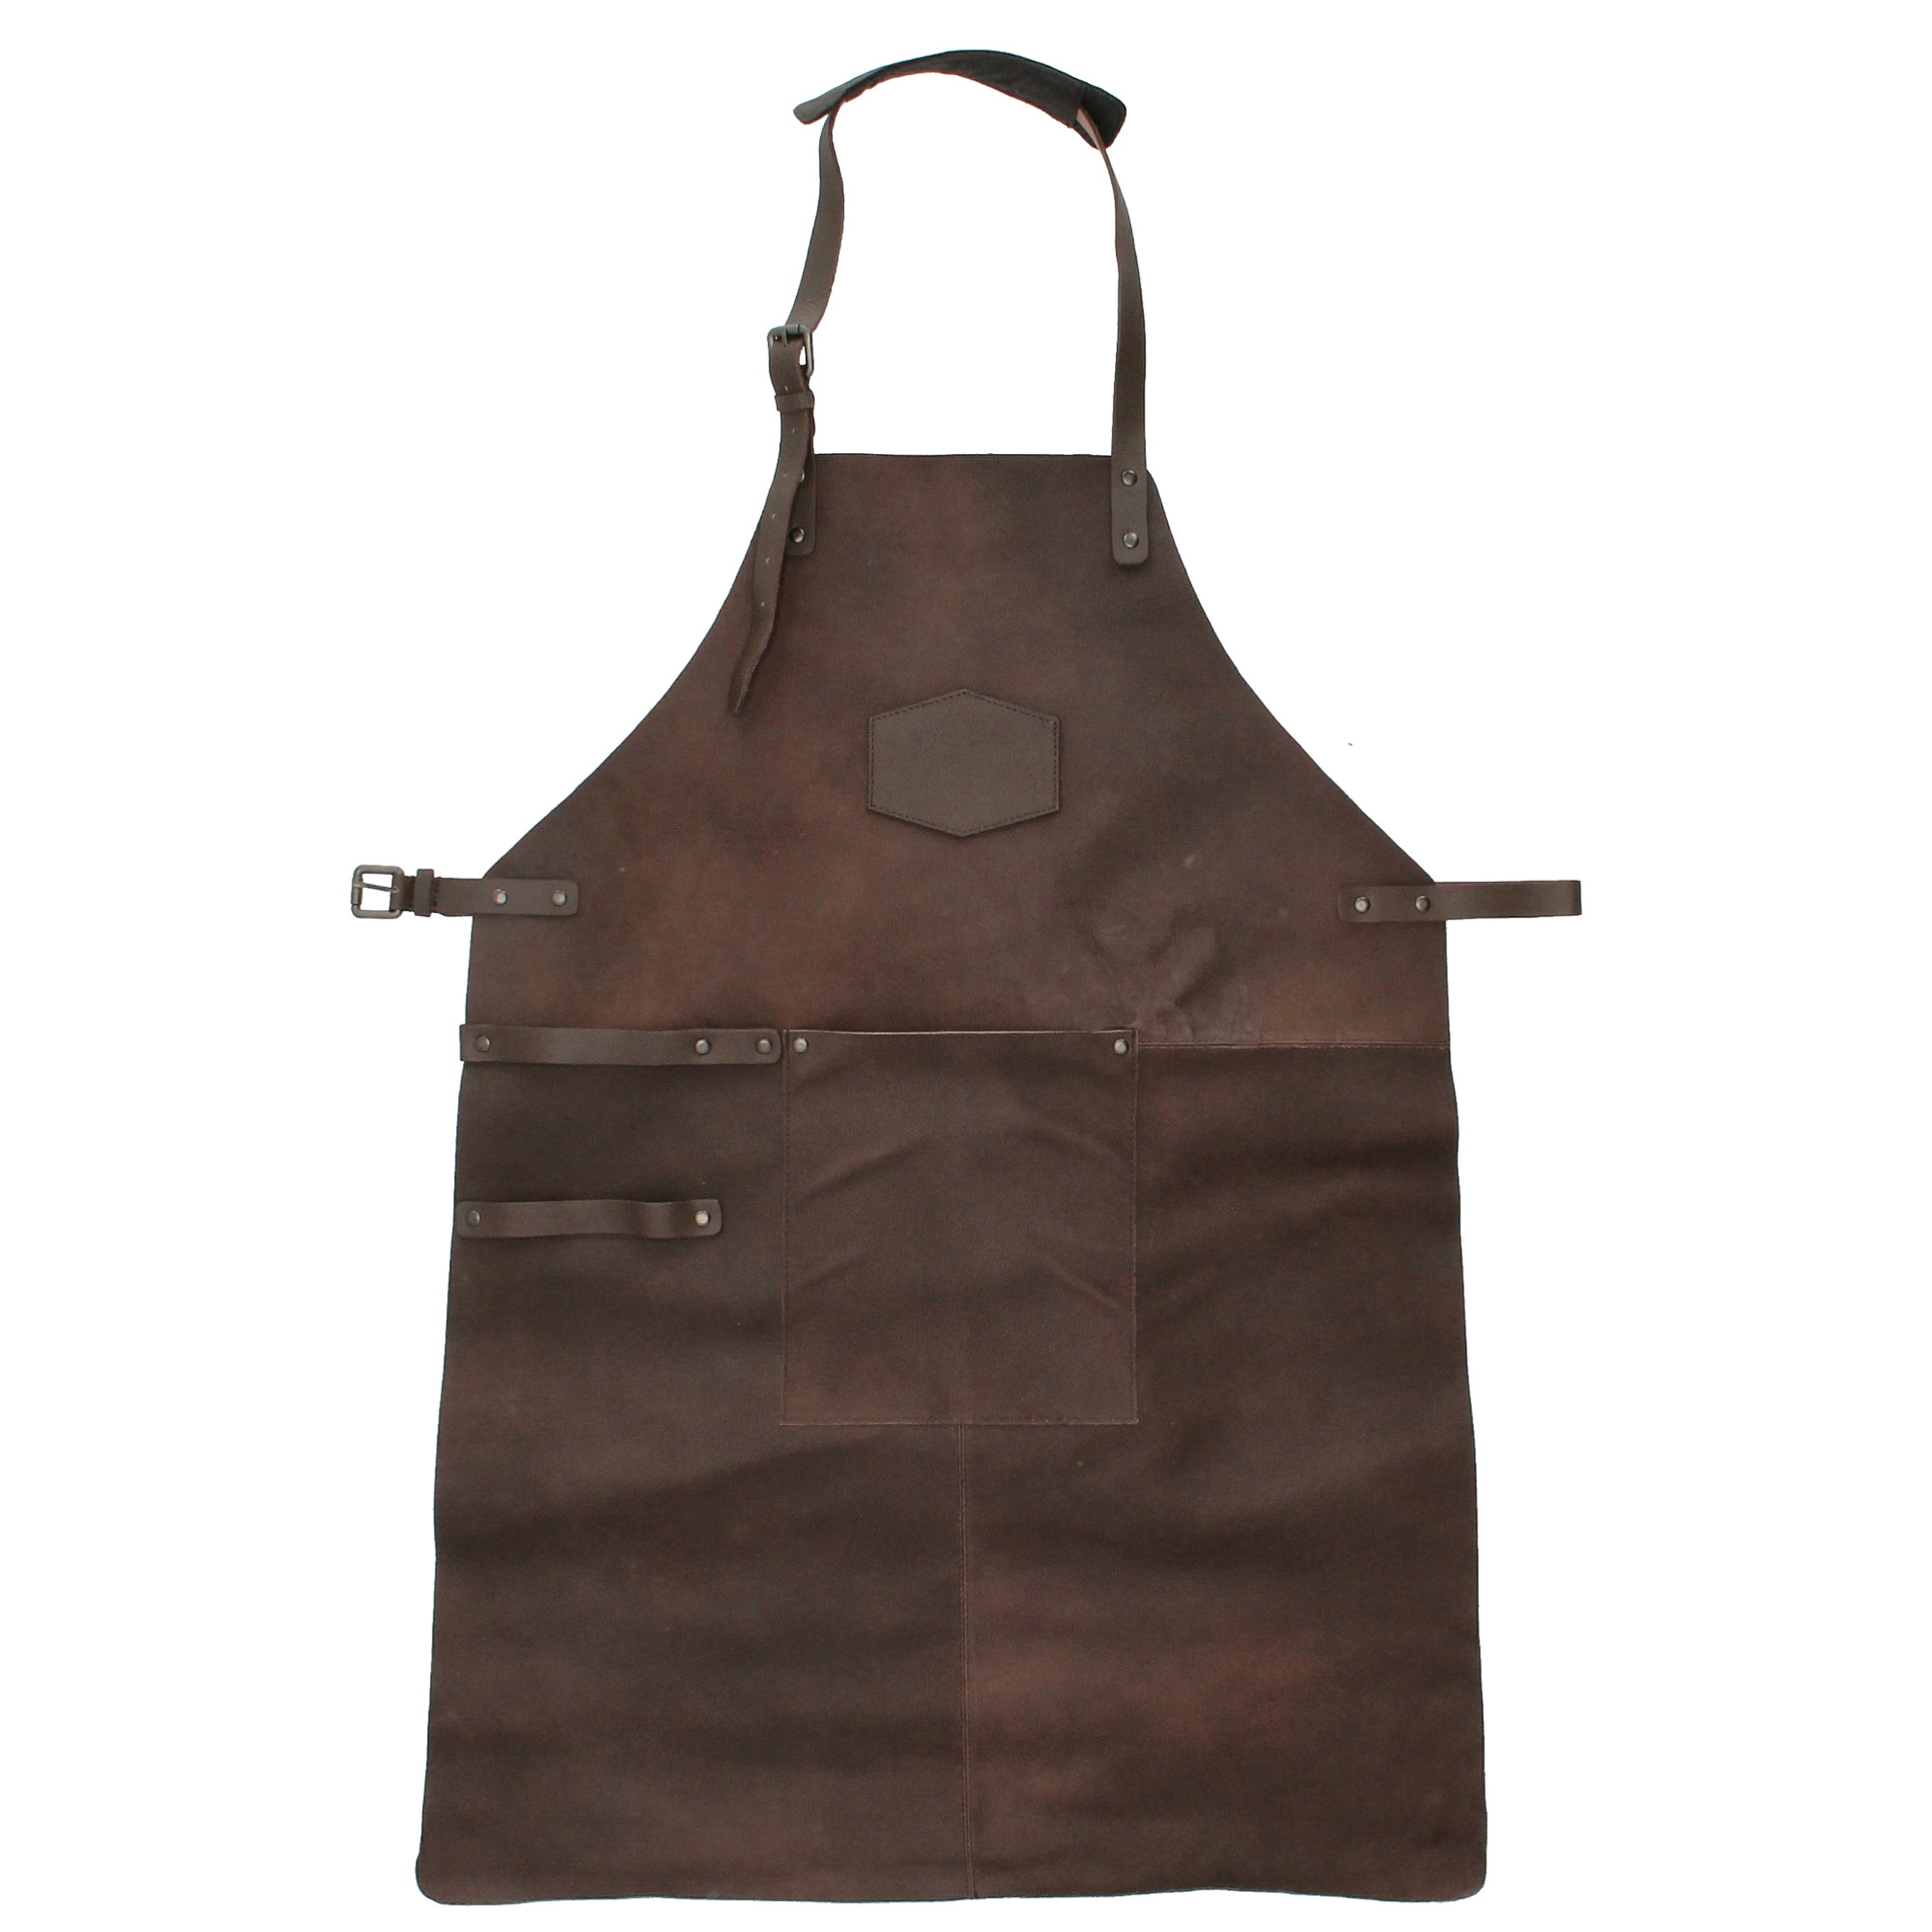 Old West Leather Apron for Grill Lovers - Dark Brown (no logo)